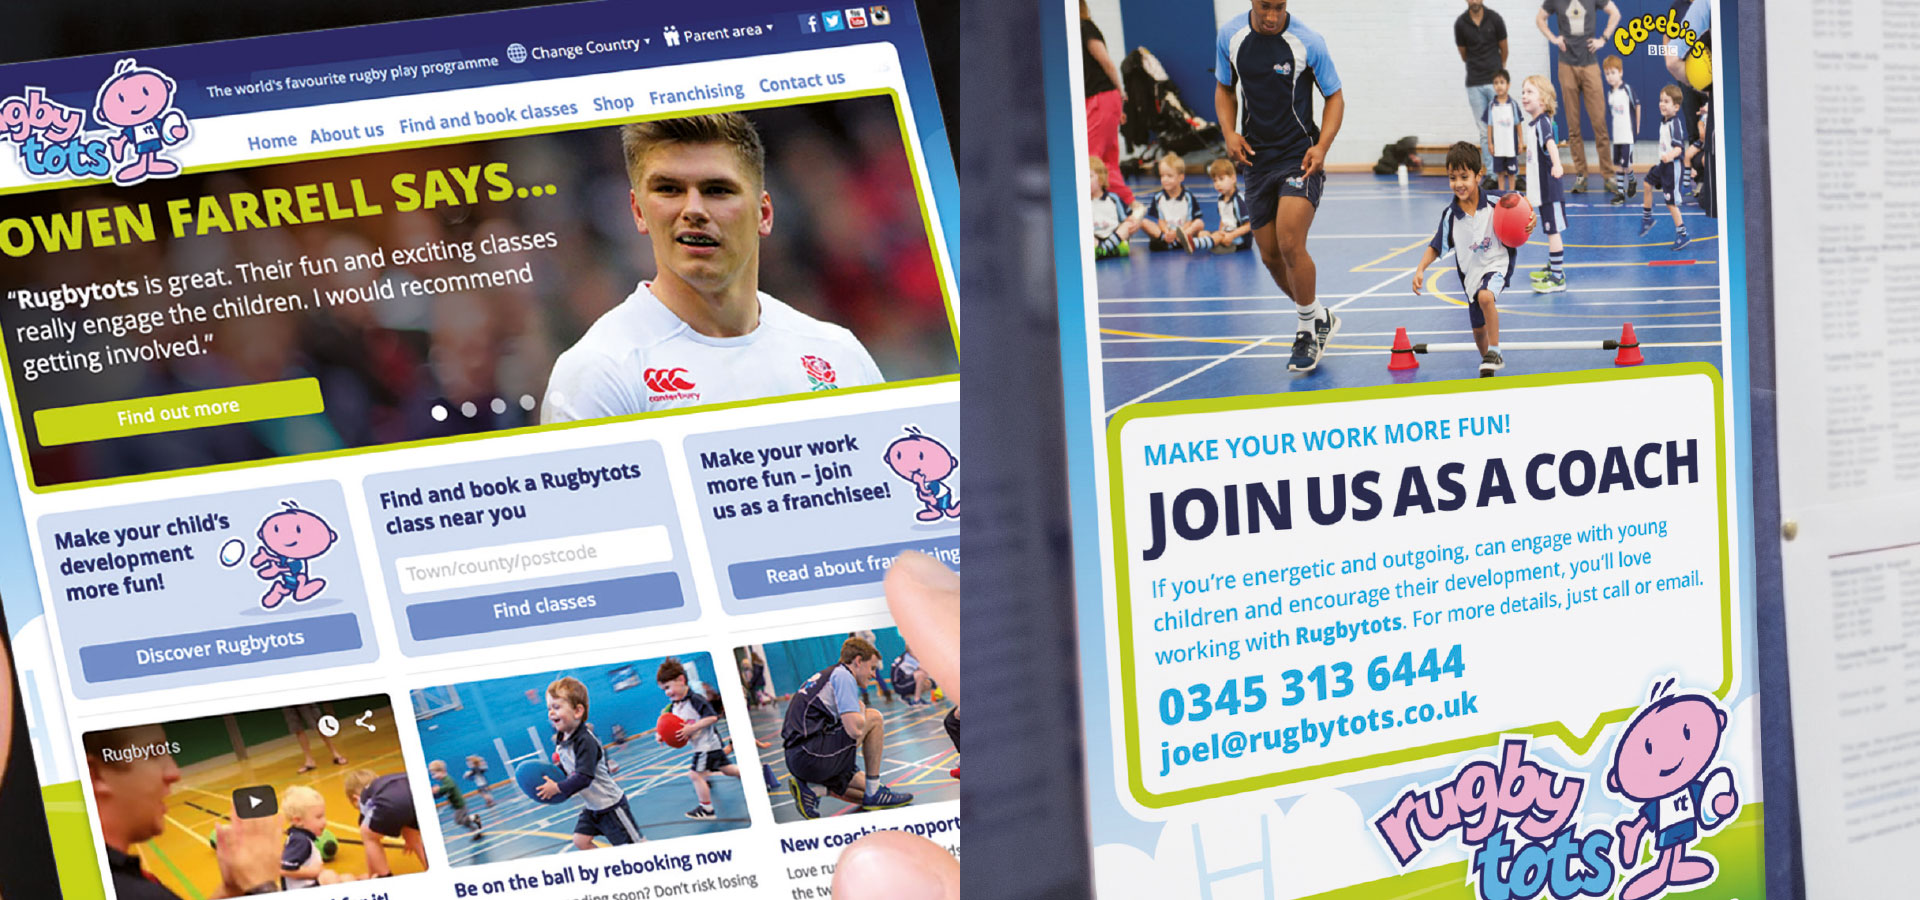 Rugbytots website and recruitment poster